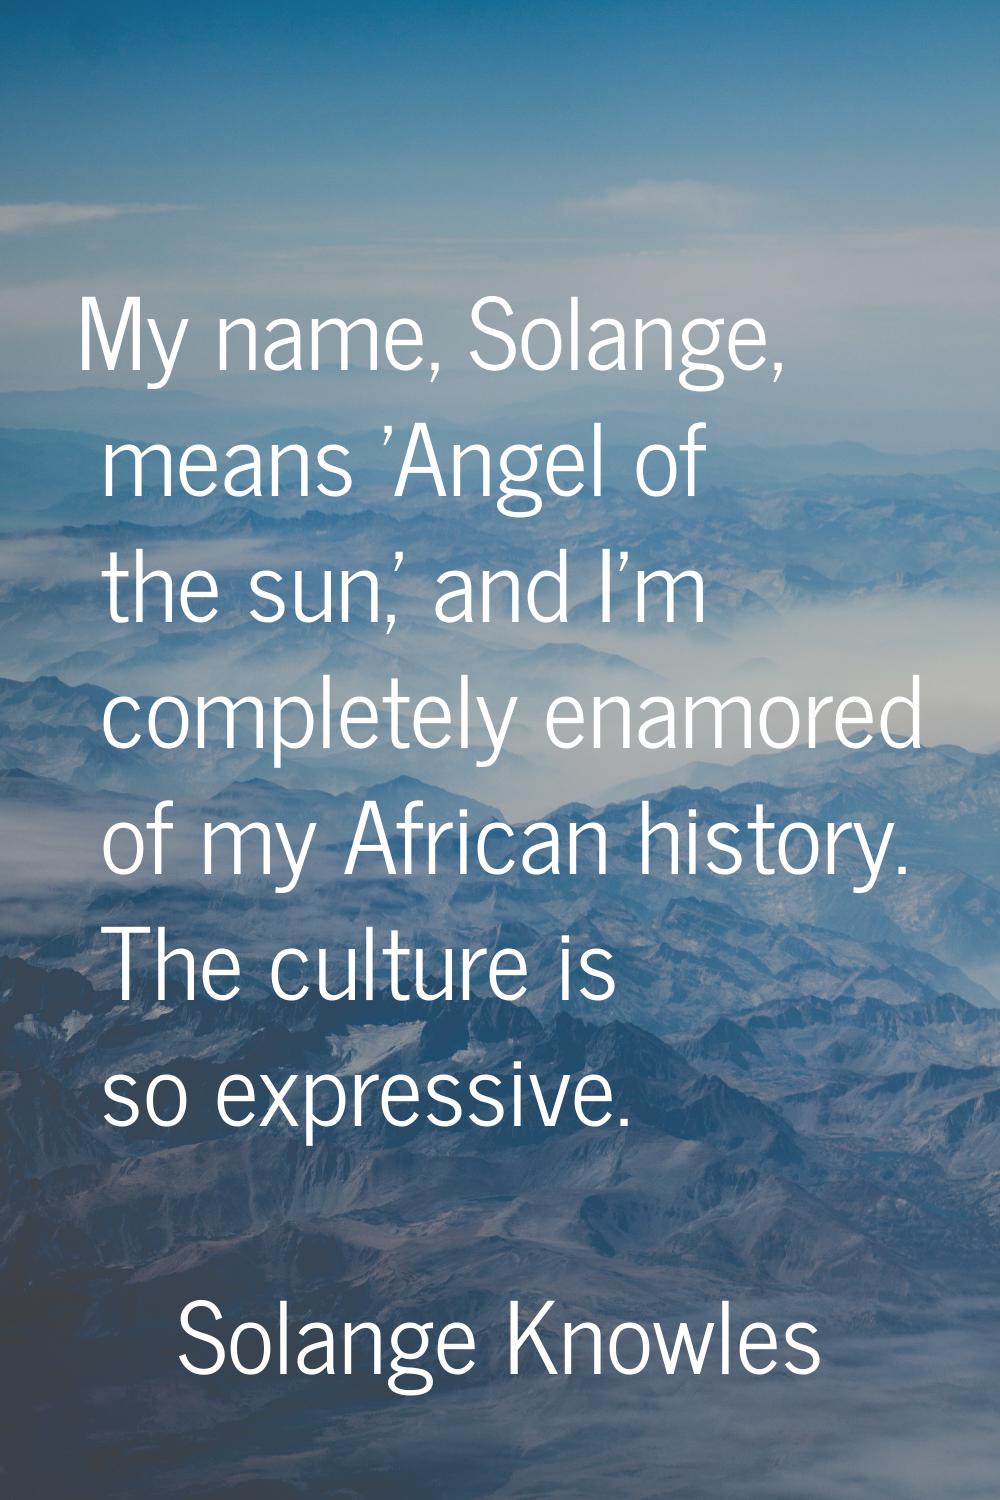 My name, Solange, means 'Angel of the sun,' and I'm completely enamored of my African history. The 